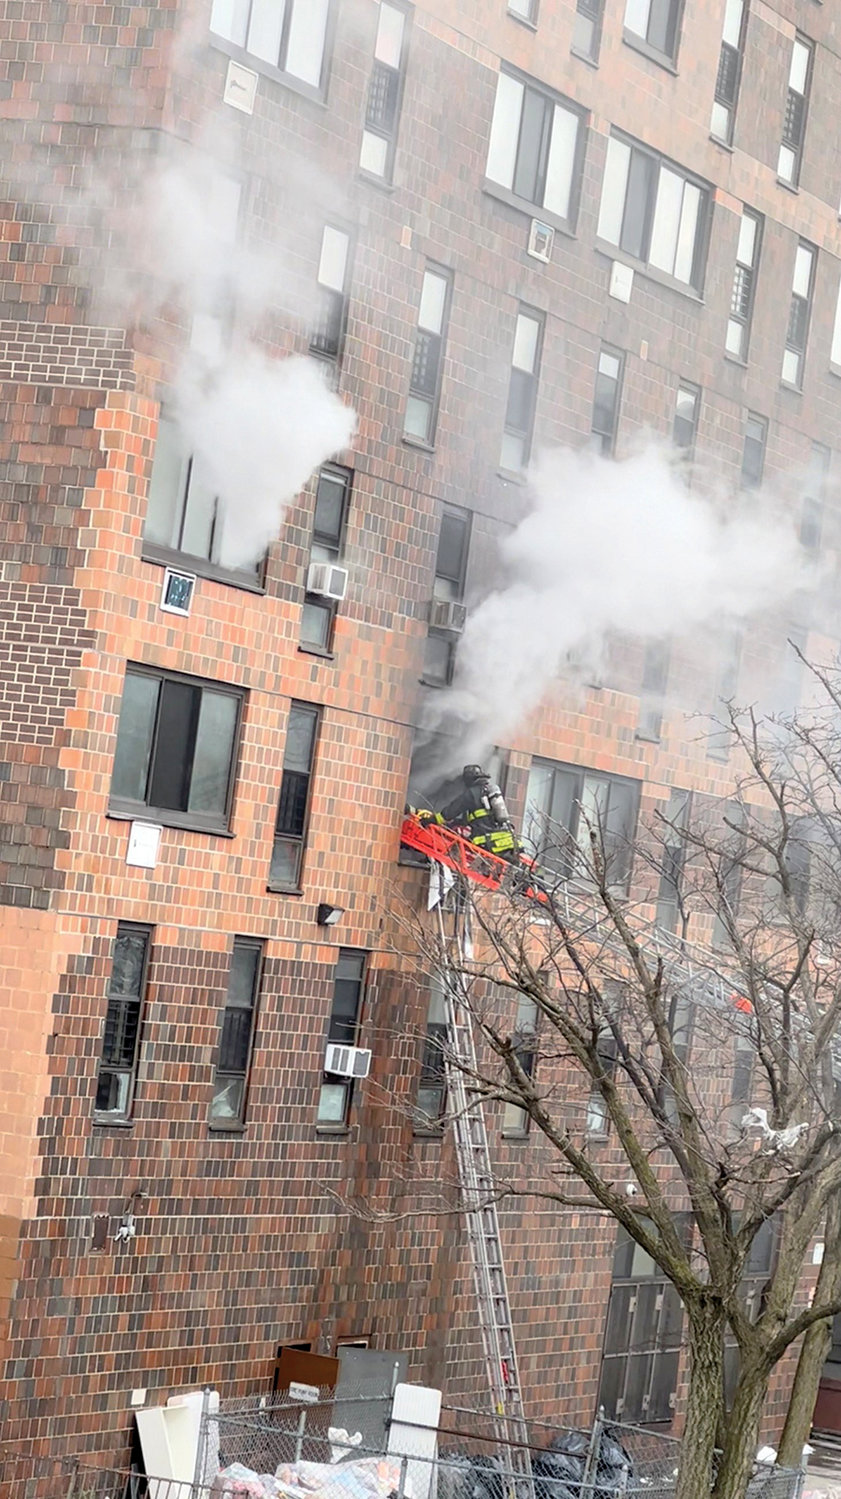 Smoke rises from windows during the devastating Jan. 9 Bronx apartment building fire, which killed 17 people, in this screen grab from a video obtained from social media.